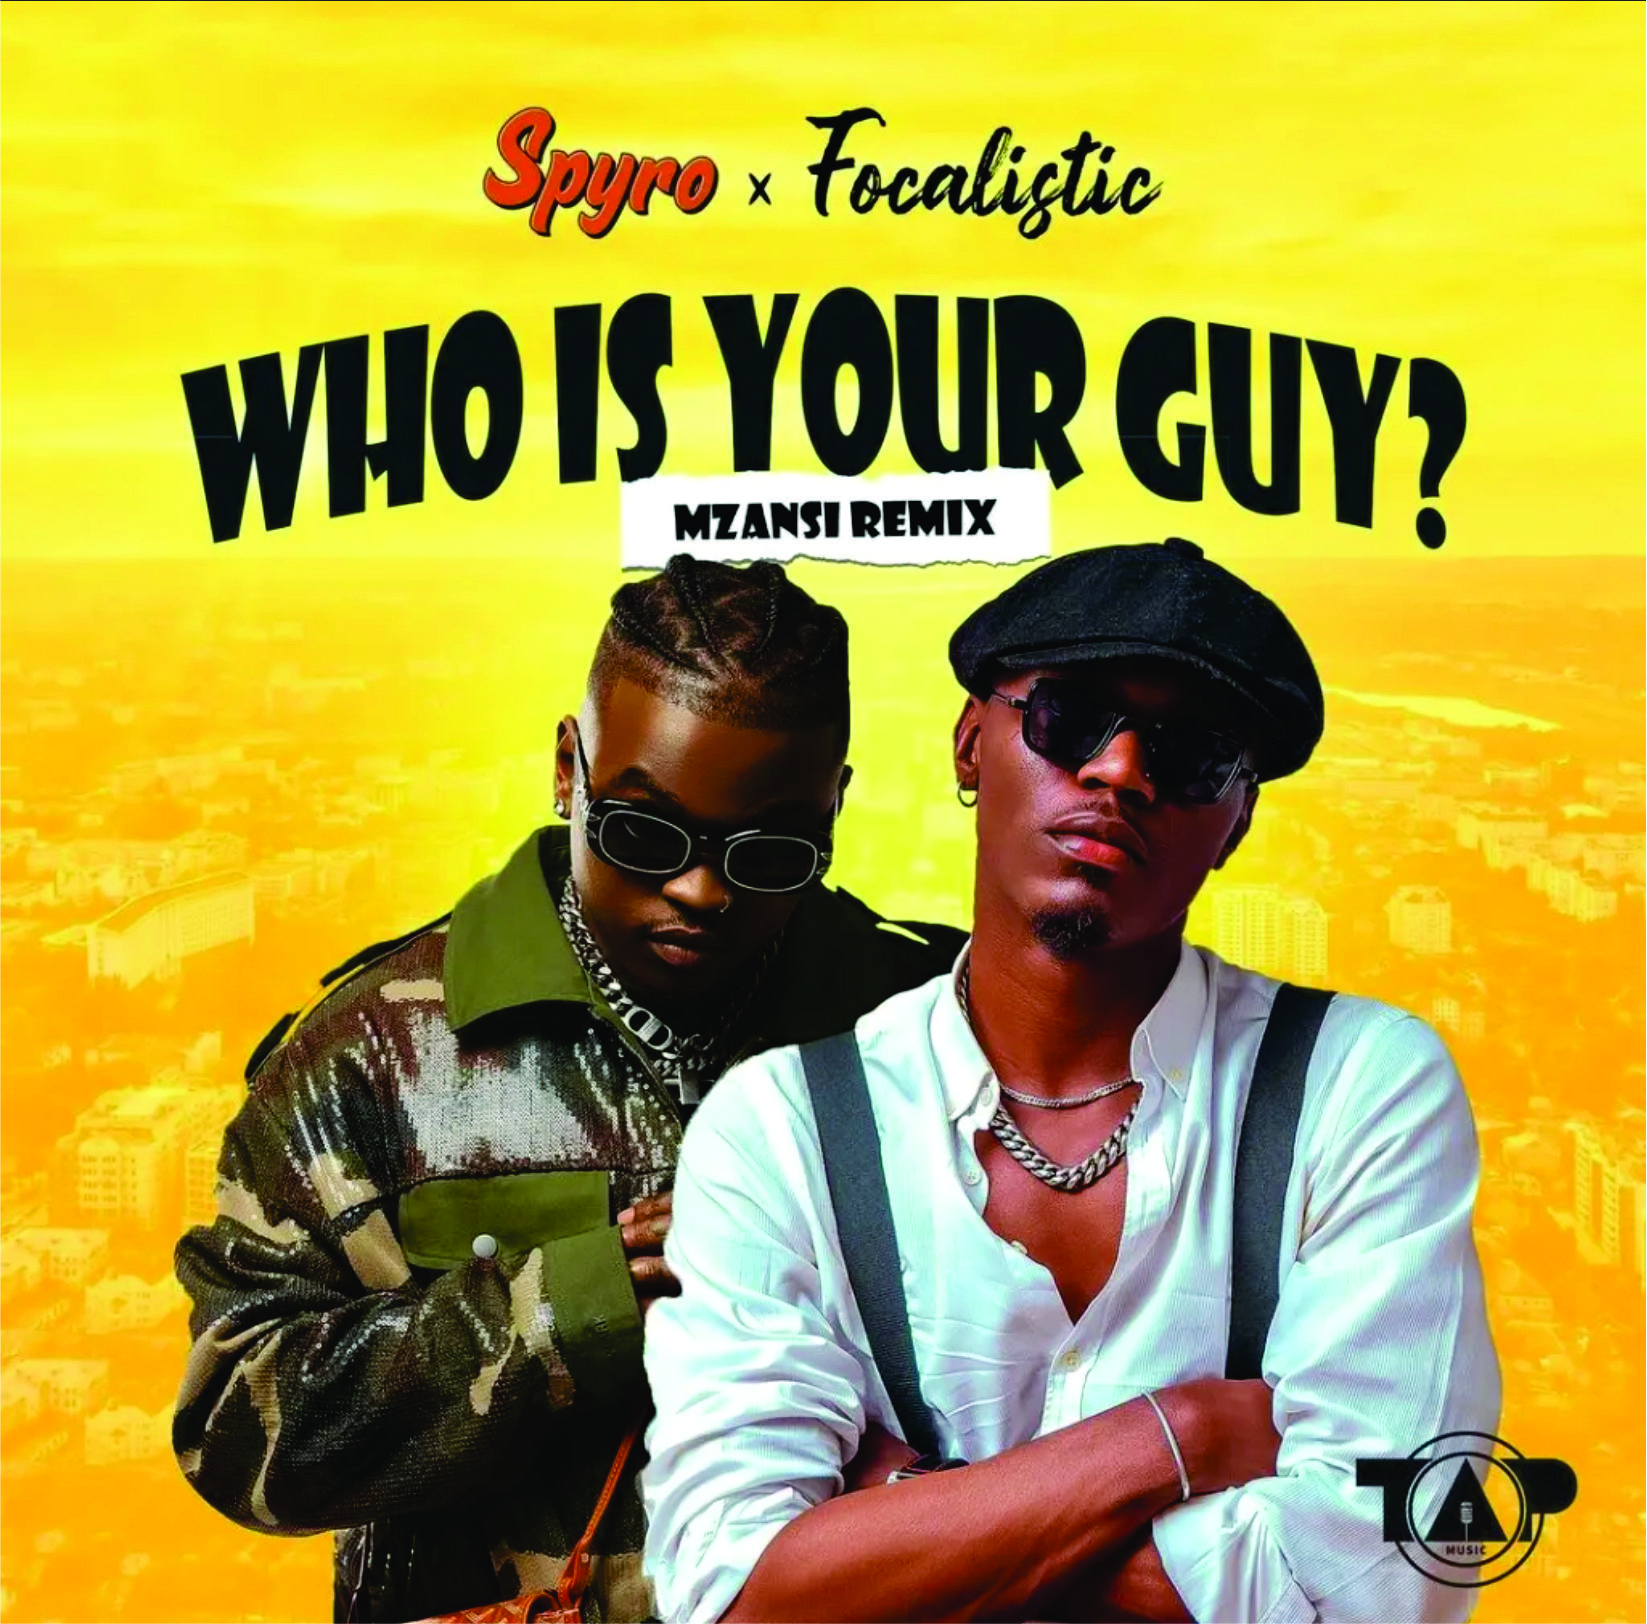 Download Music: Spyro – Who Is Your Guy (Mzansi Remix) Ft. Focalistic